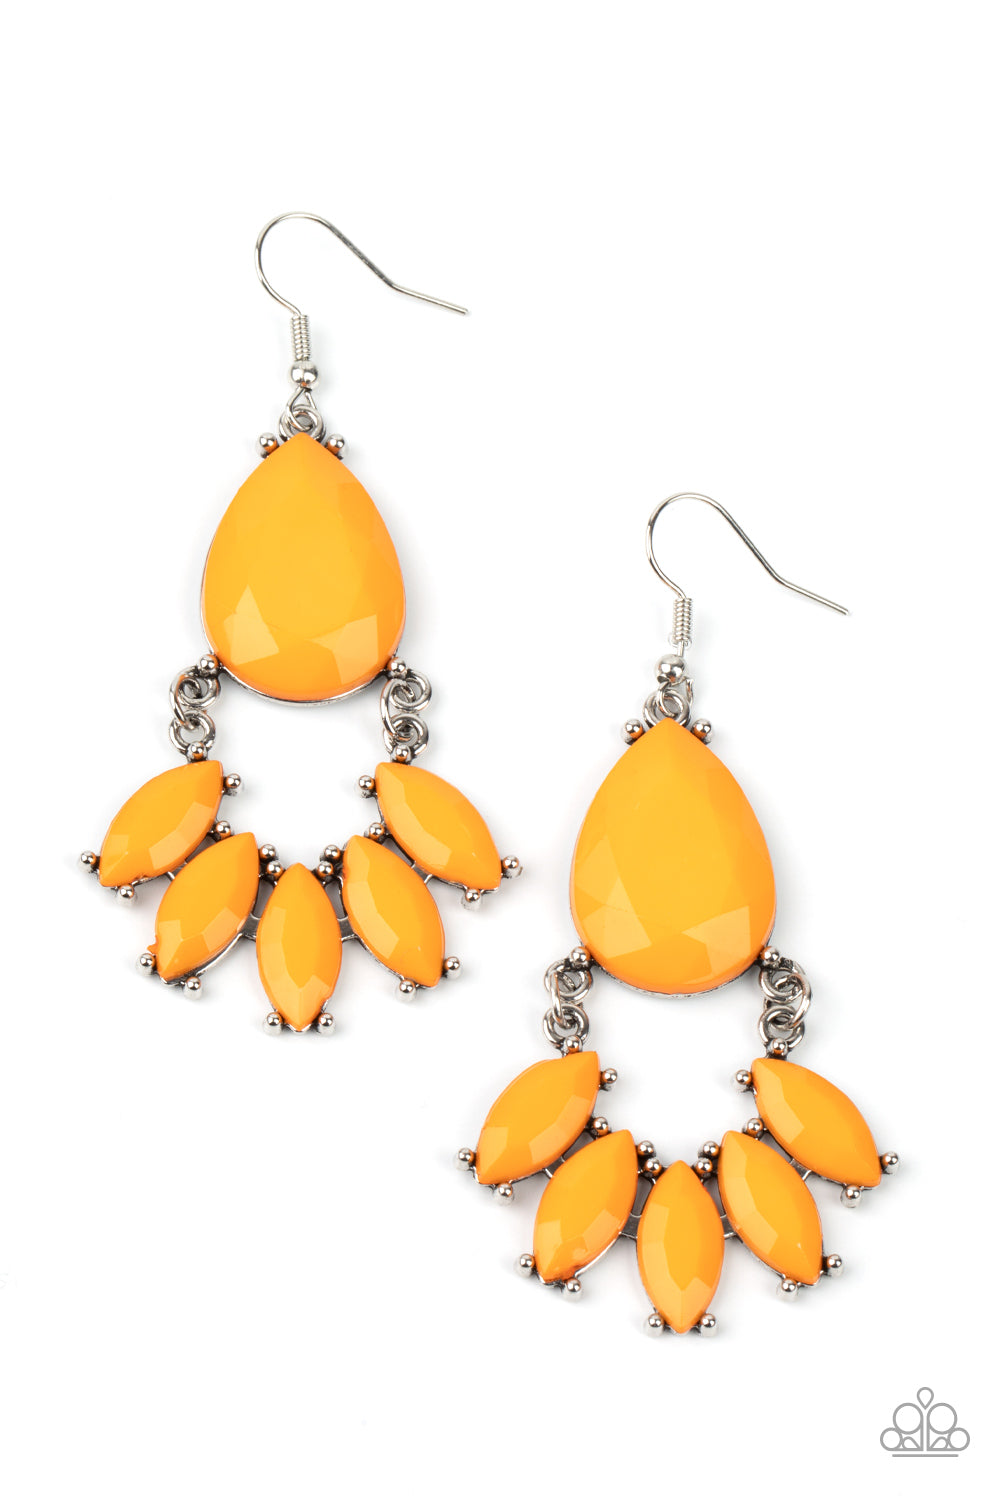 Paparazzi Accessories POWERHOUSE Call - Orange Earrings - Lady T Accessories